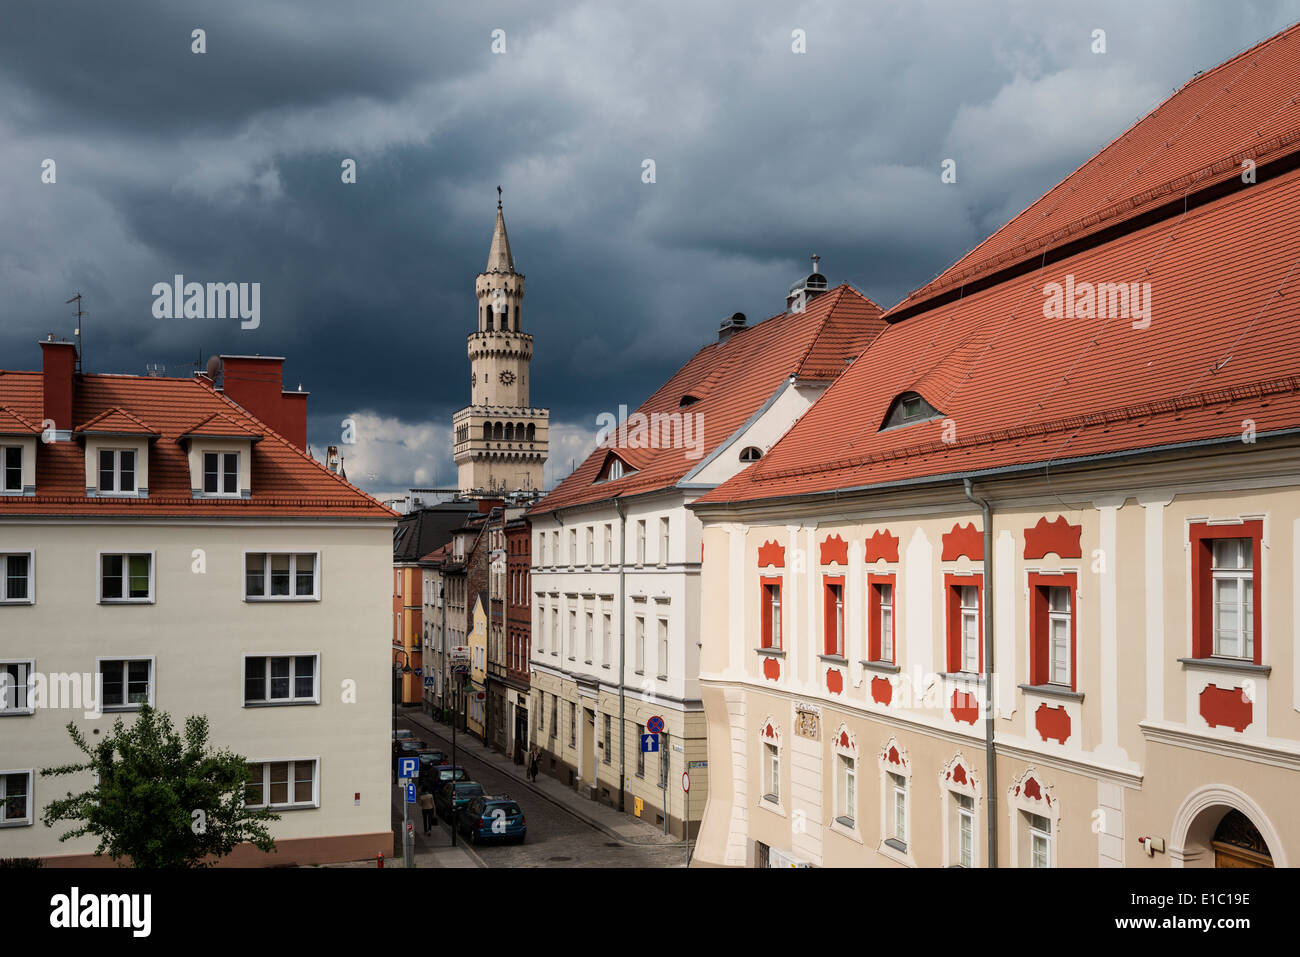 Town hall tower rises above old town, Opole, Silesia, Poland Stock Photo